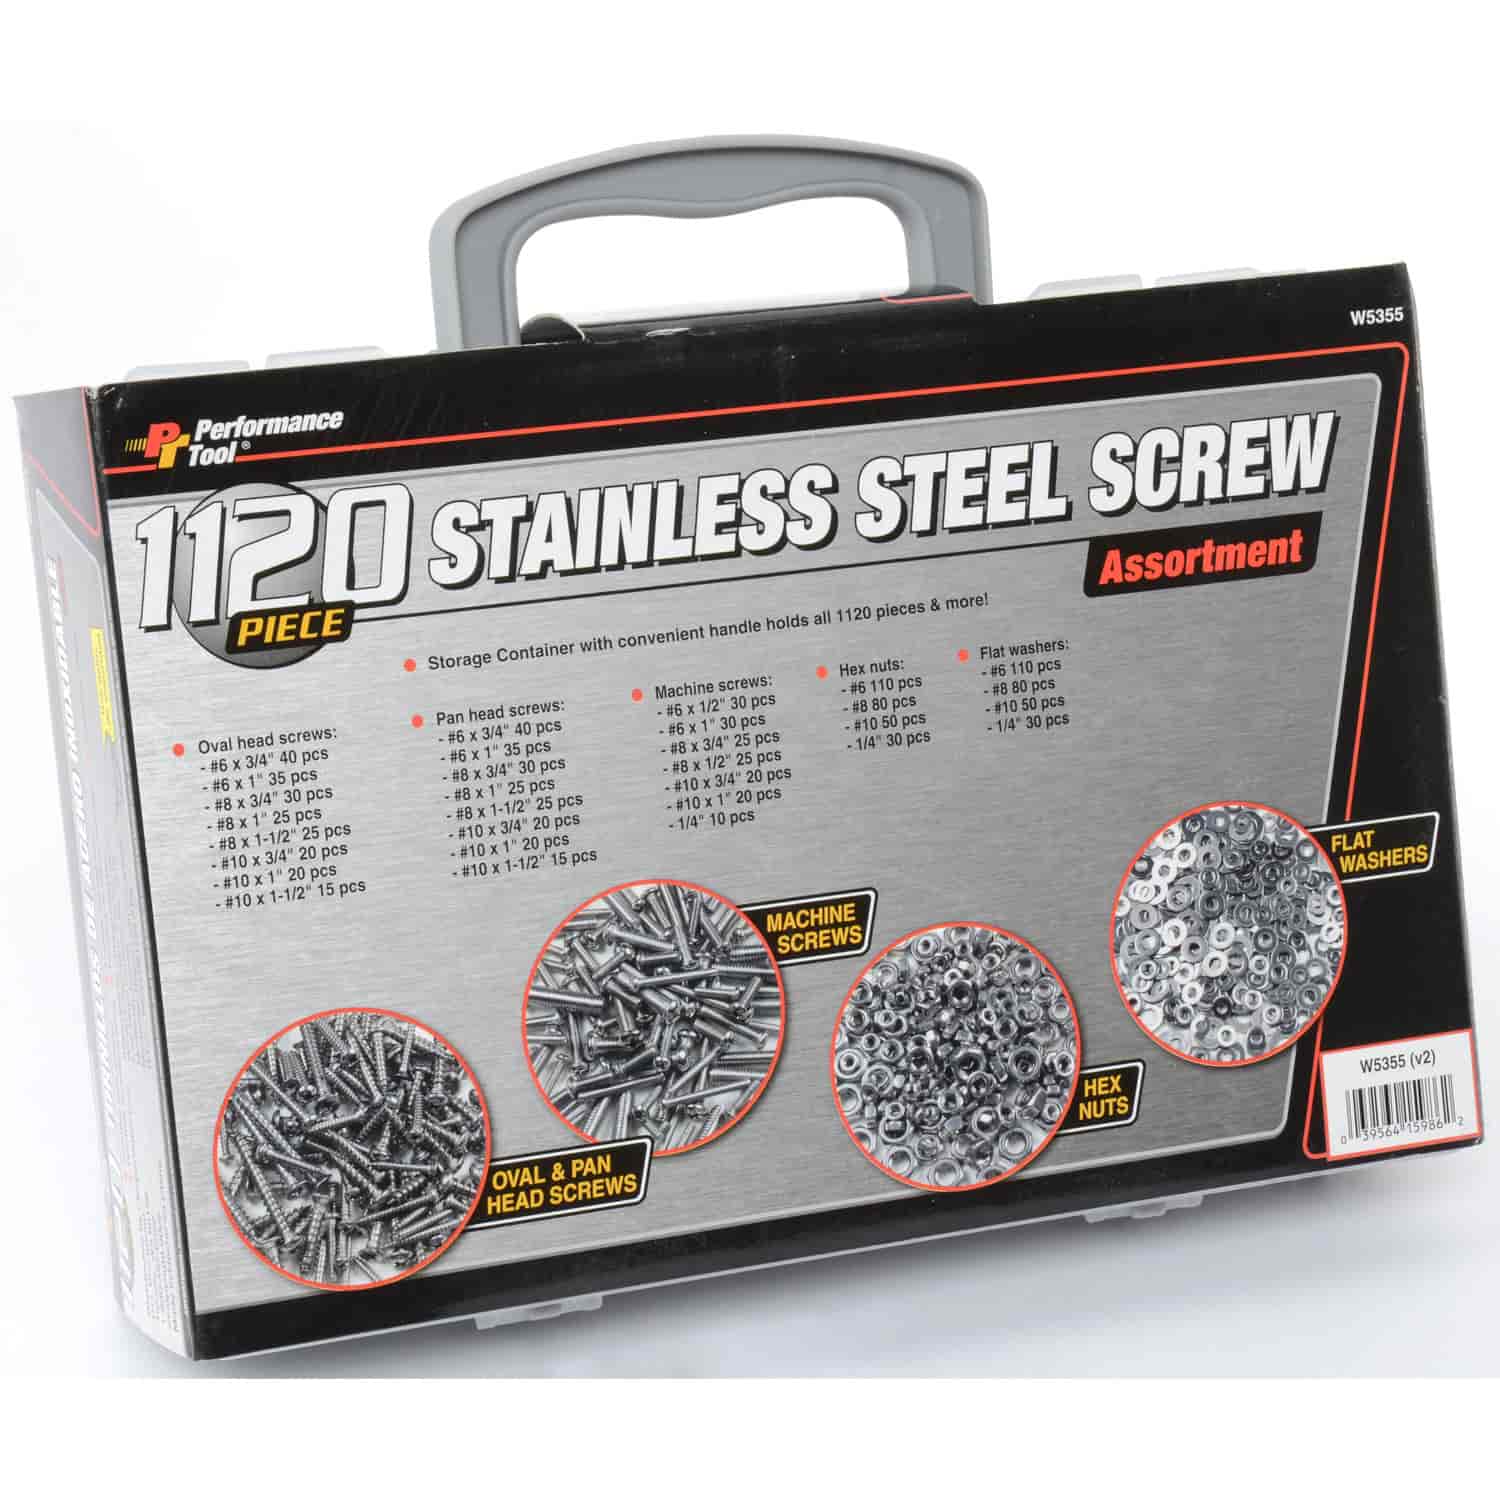 Stainless Steel Screw, Hex Nut and Flat Washer Assortment 1120 Pieces